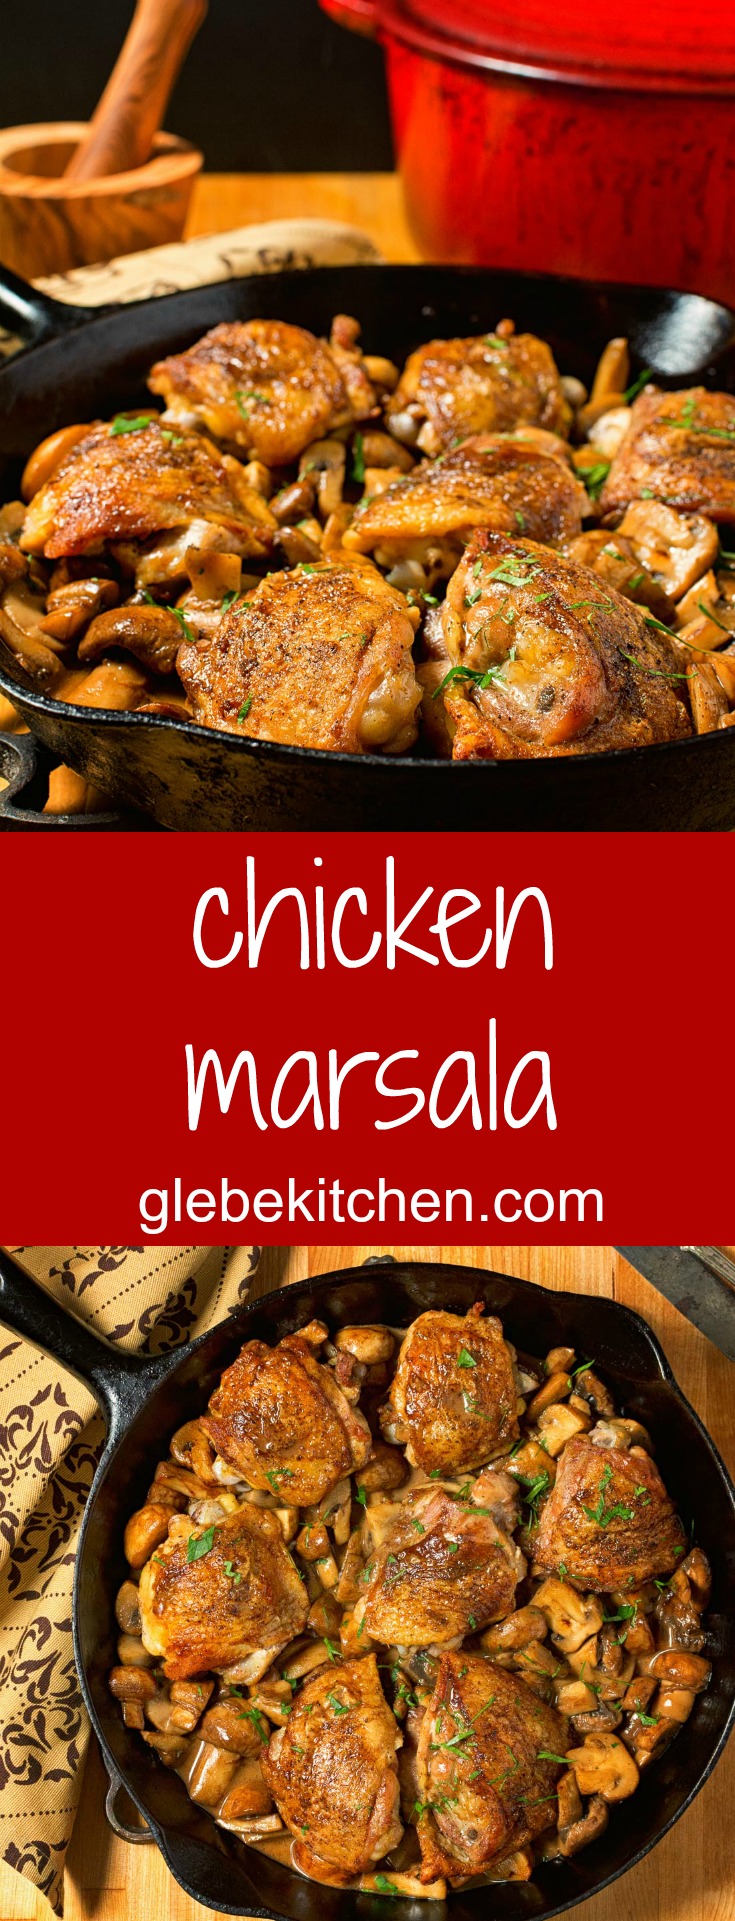 Rustic chicken marsala. Less fuss and more flavour.